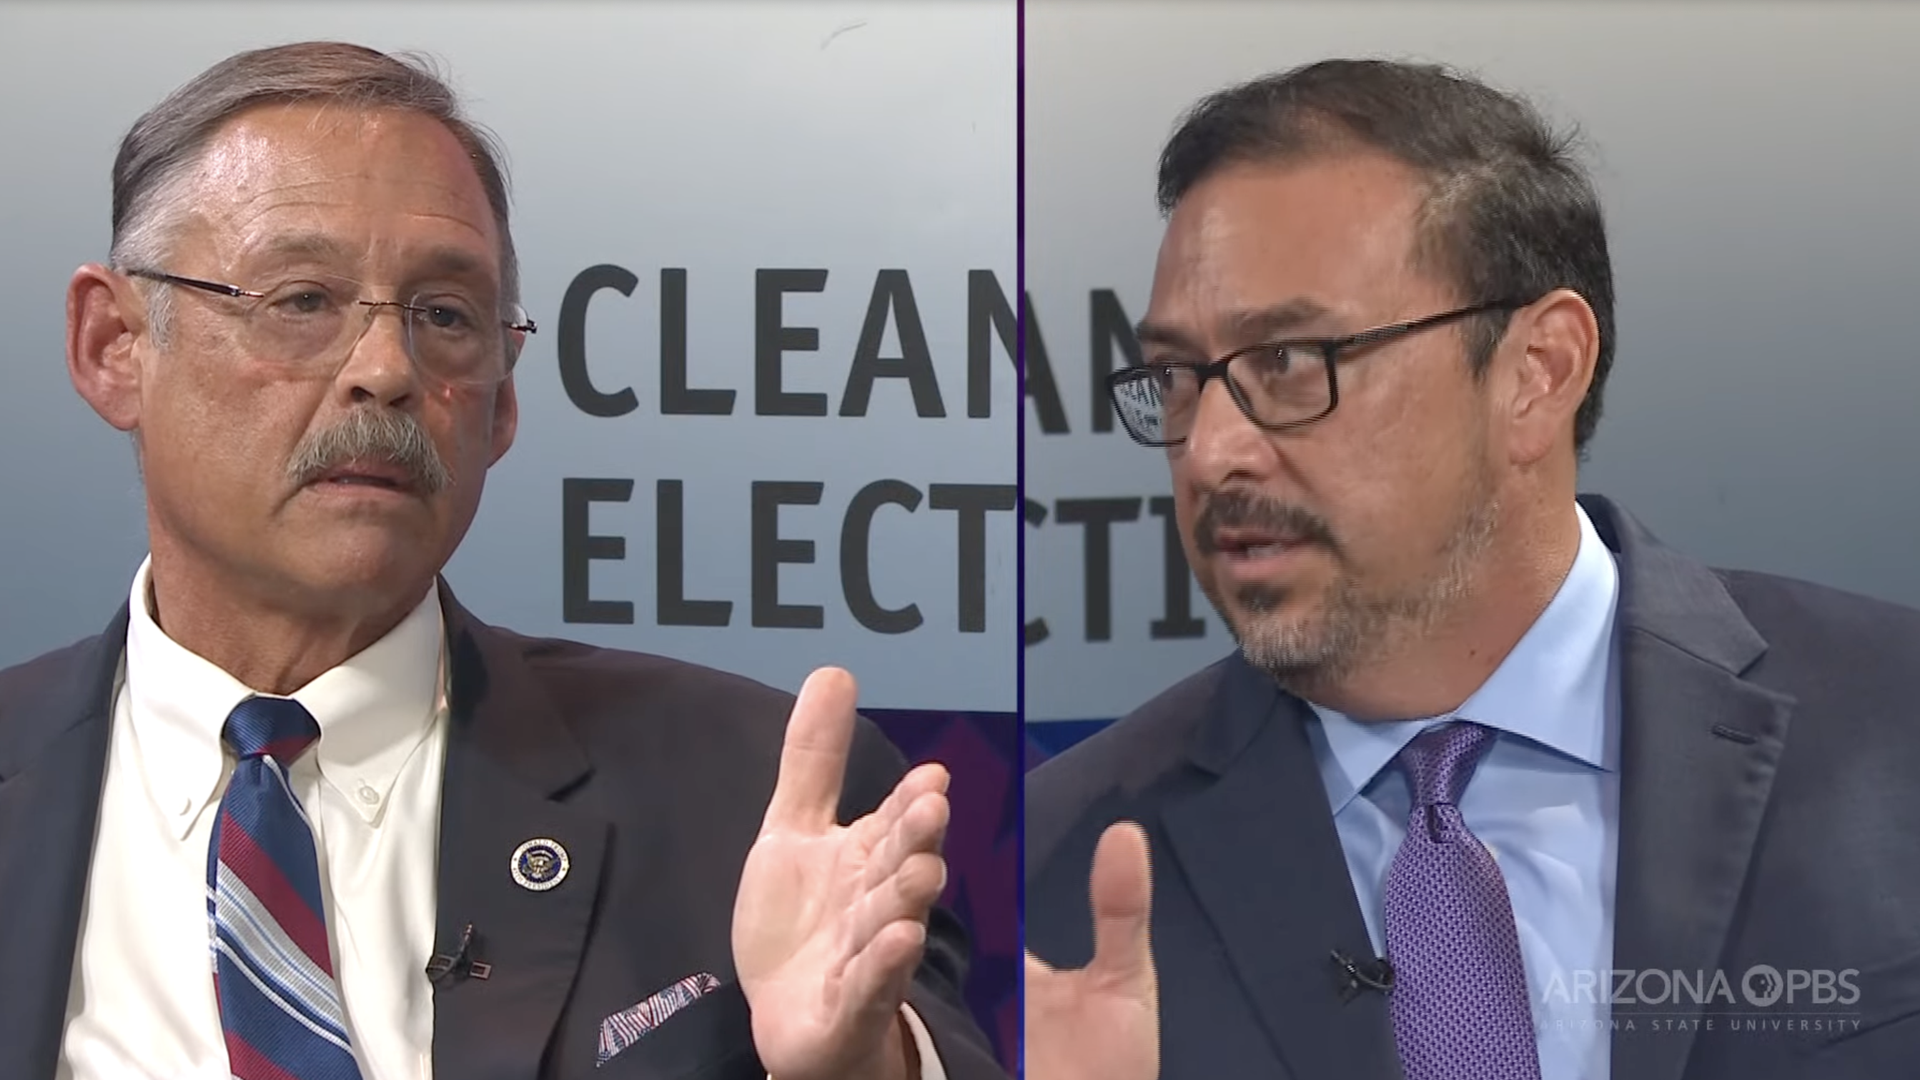 A split screen showing Mark Finchem and Adrian Fontes during a debate